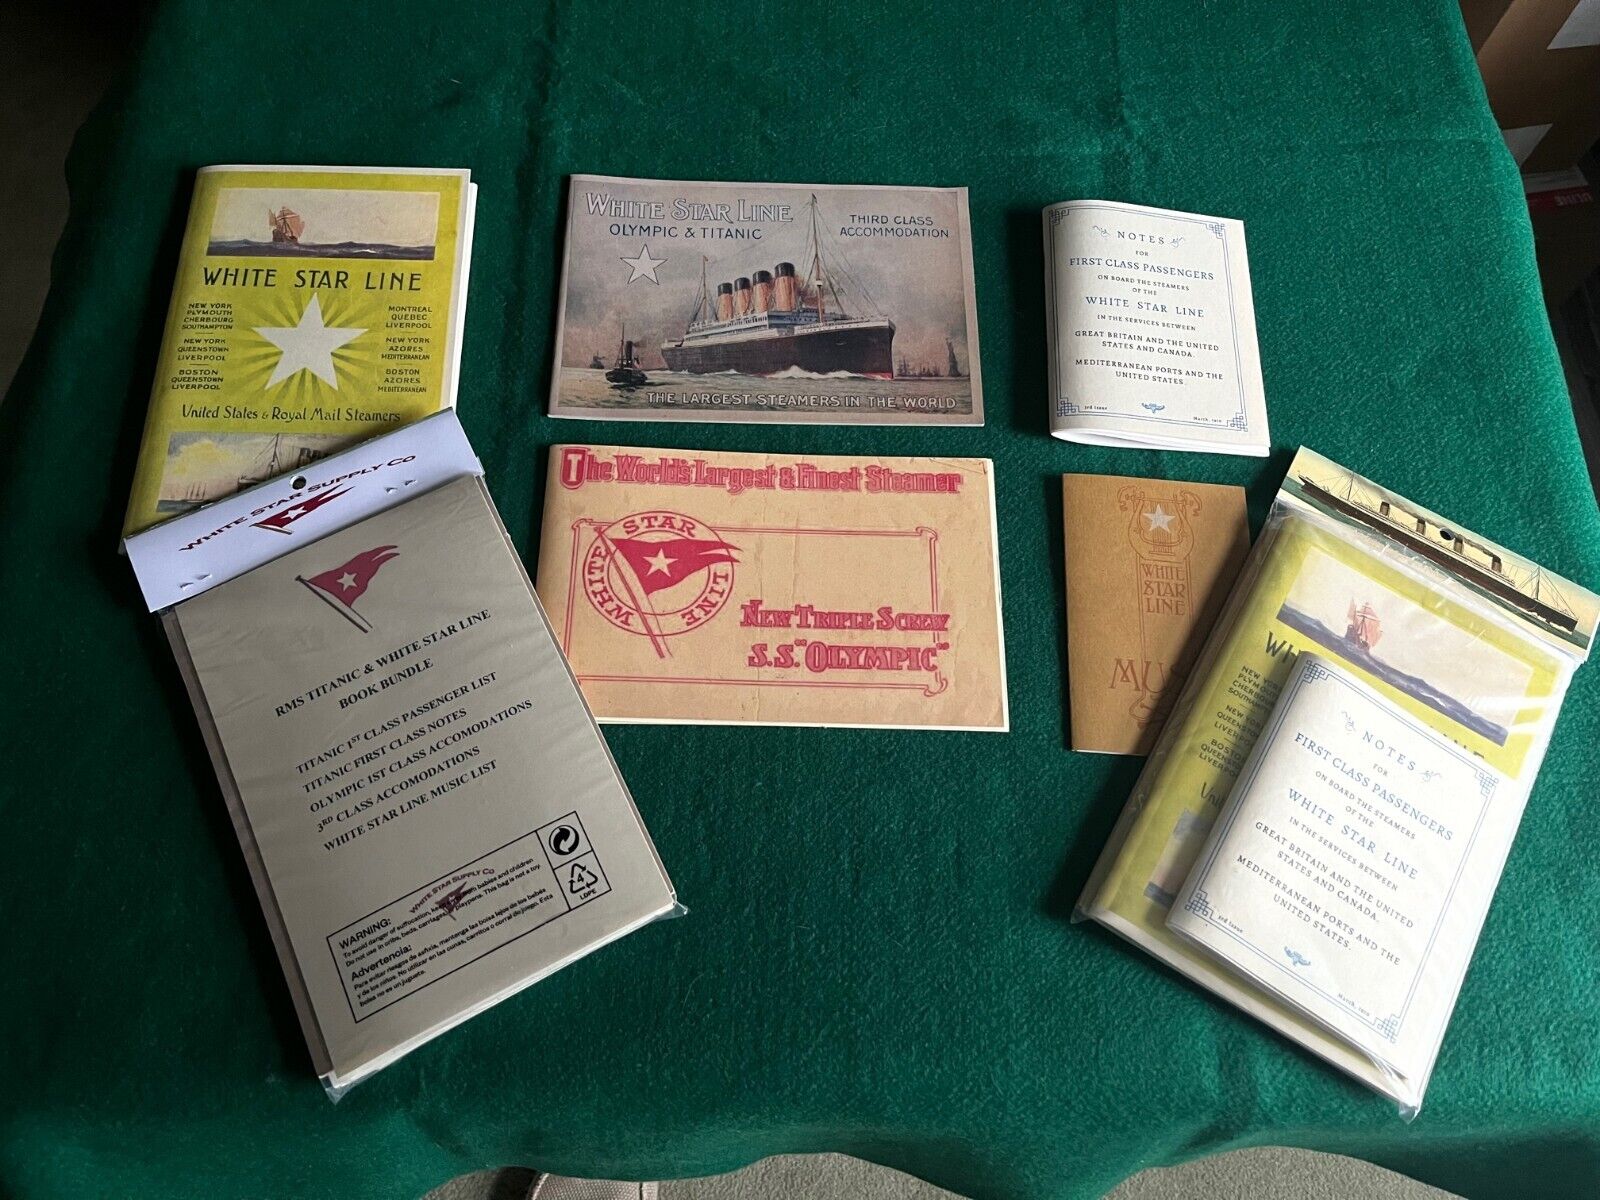 WHITE STAR LINE RMS TITANIC, RMS OLYMPIC, AUTHENTIC REPLICA BOOK BUNDLES 1911-12